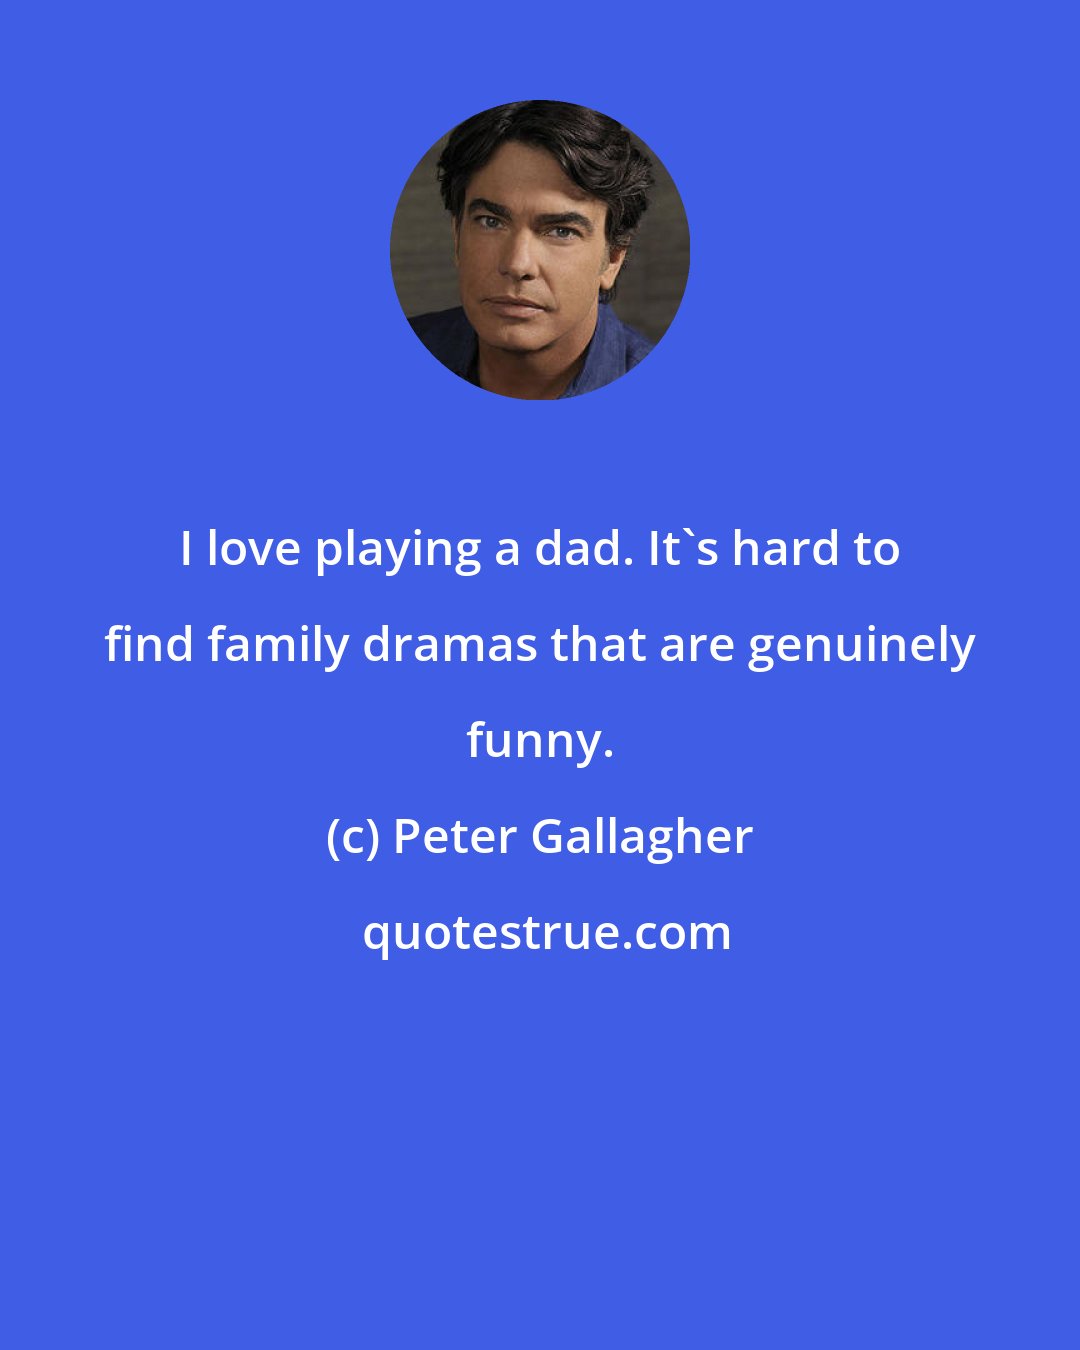 Peter Gallagher: I love playing a dad. It's hard to find family dramas that are genuinely funny.